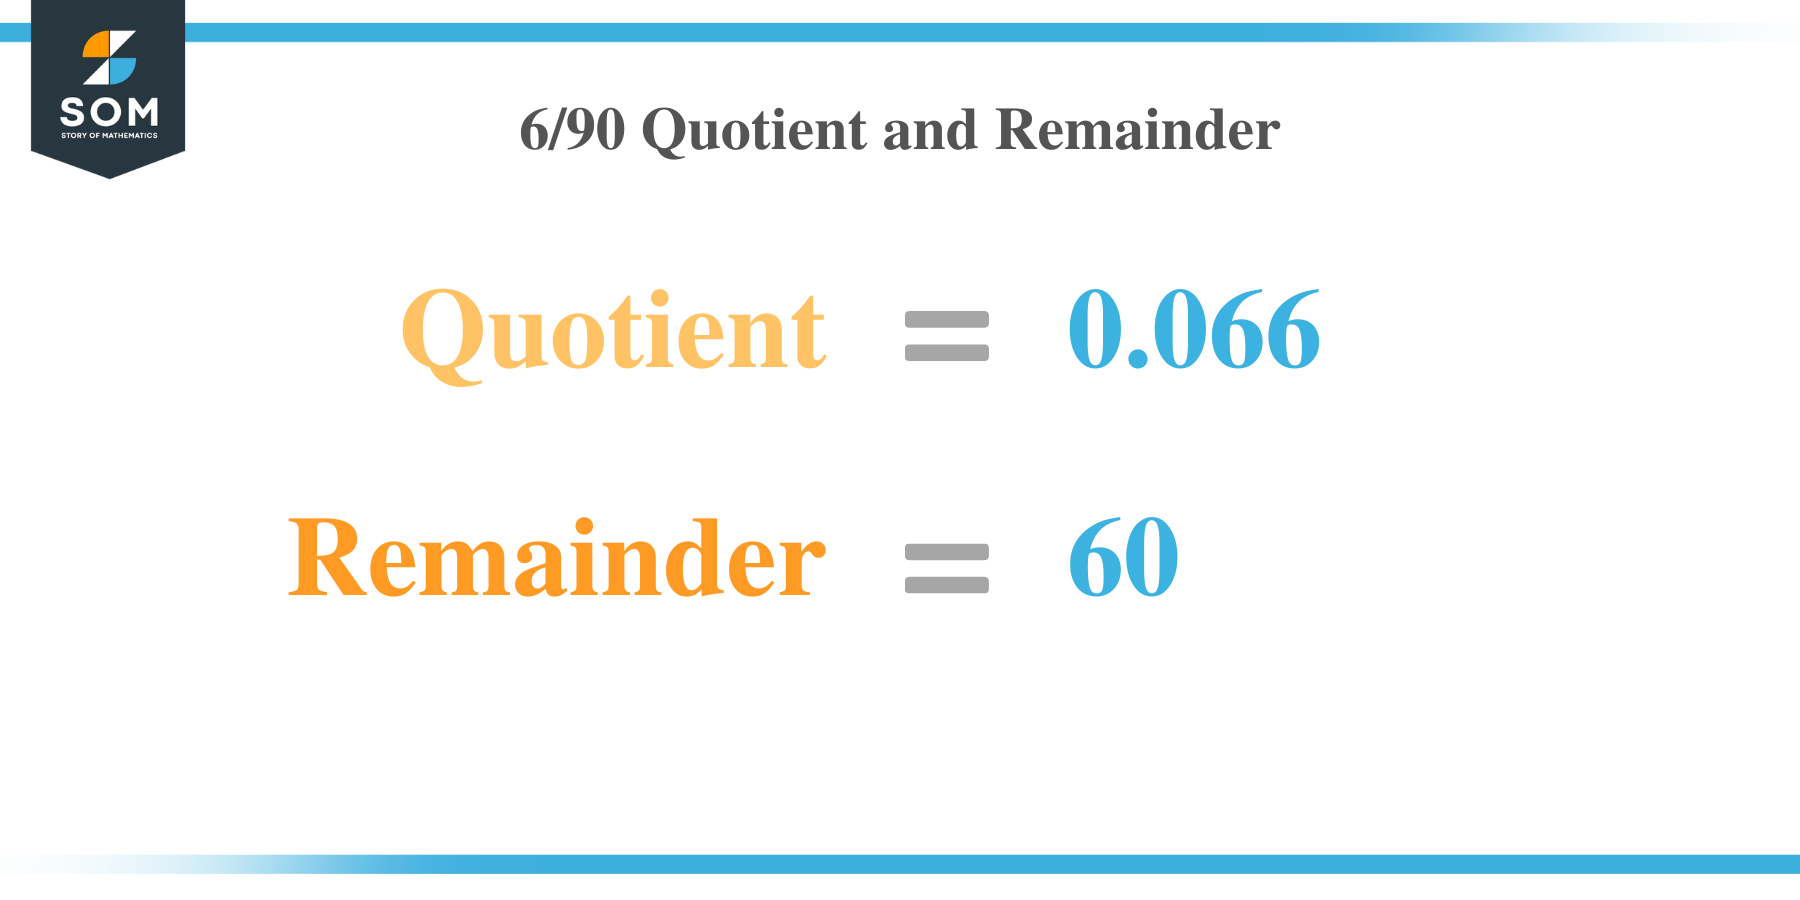 6 by 90 Quotient and Remainder